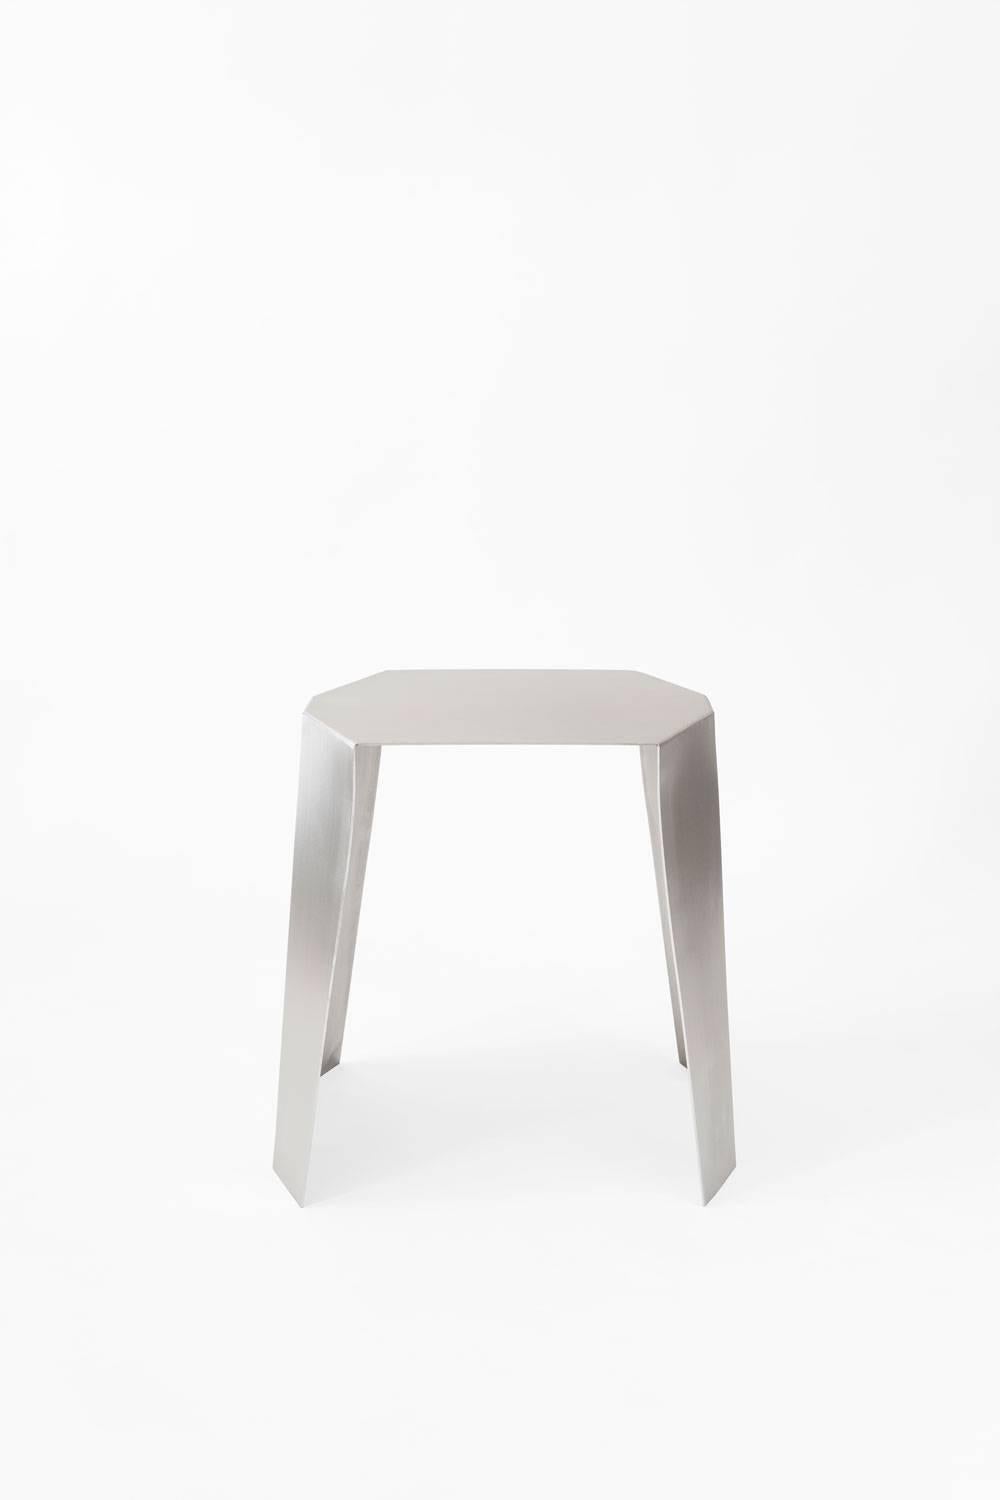 Side table designed by Adolfo Abejon.

Material: Stainless steel.

Dimensions: 45 × 40 × 45 cm (L × W × H). 

Katy is a side table, but, above all, it's a feeling for sculpture handmade in a stainless steel sheet. Katy is born performing